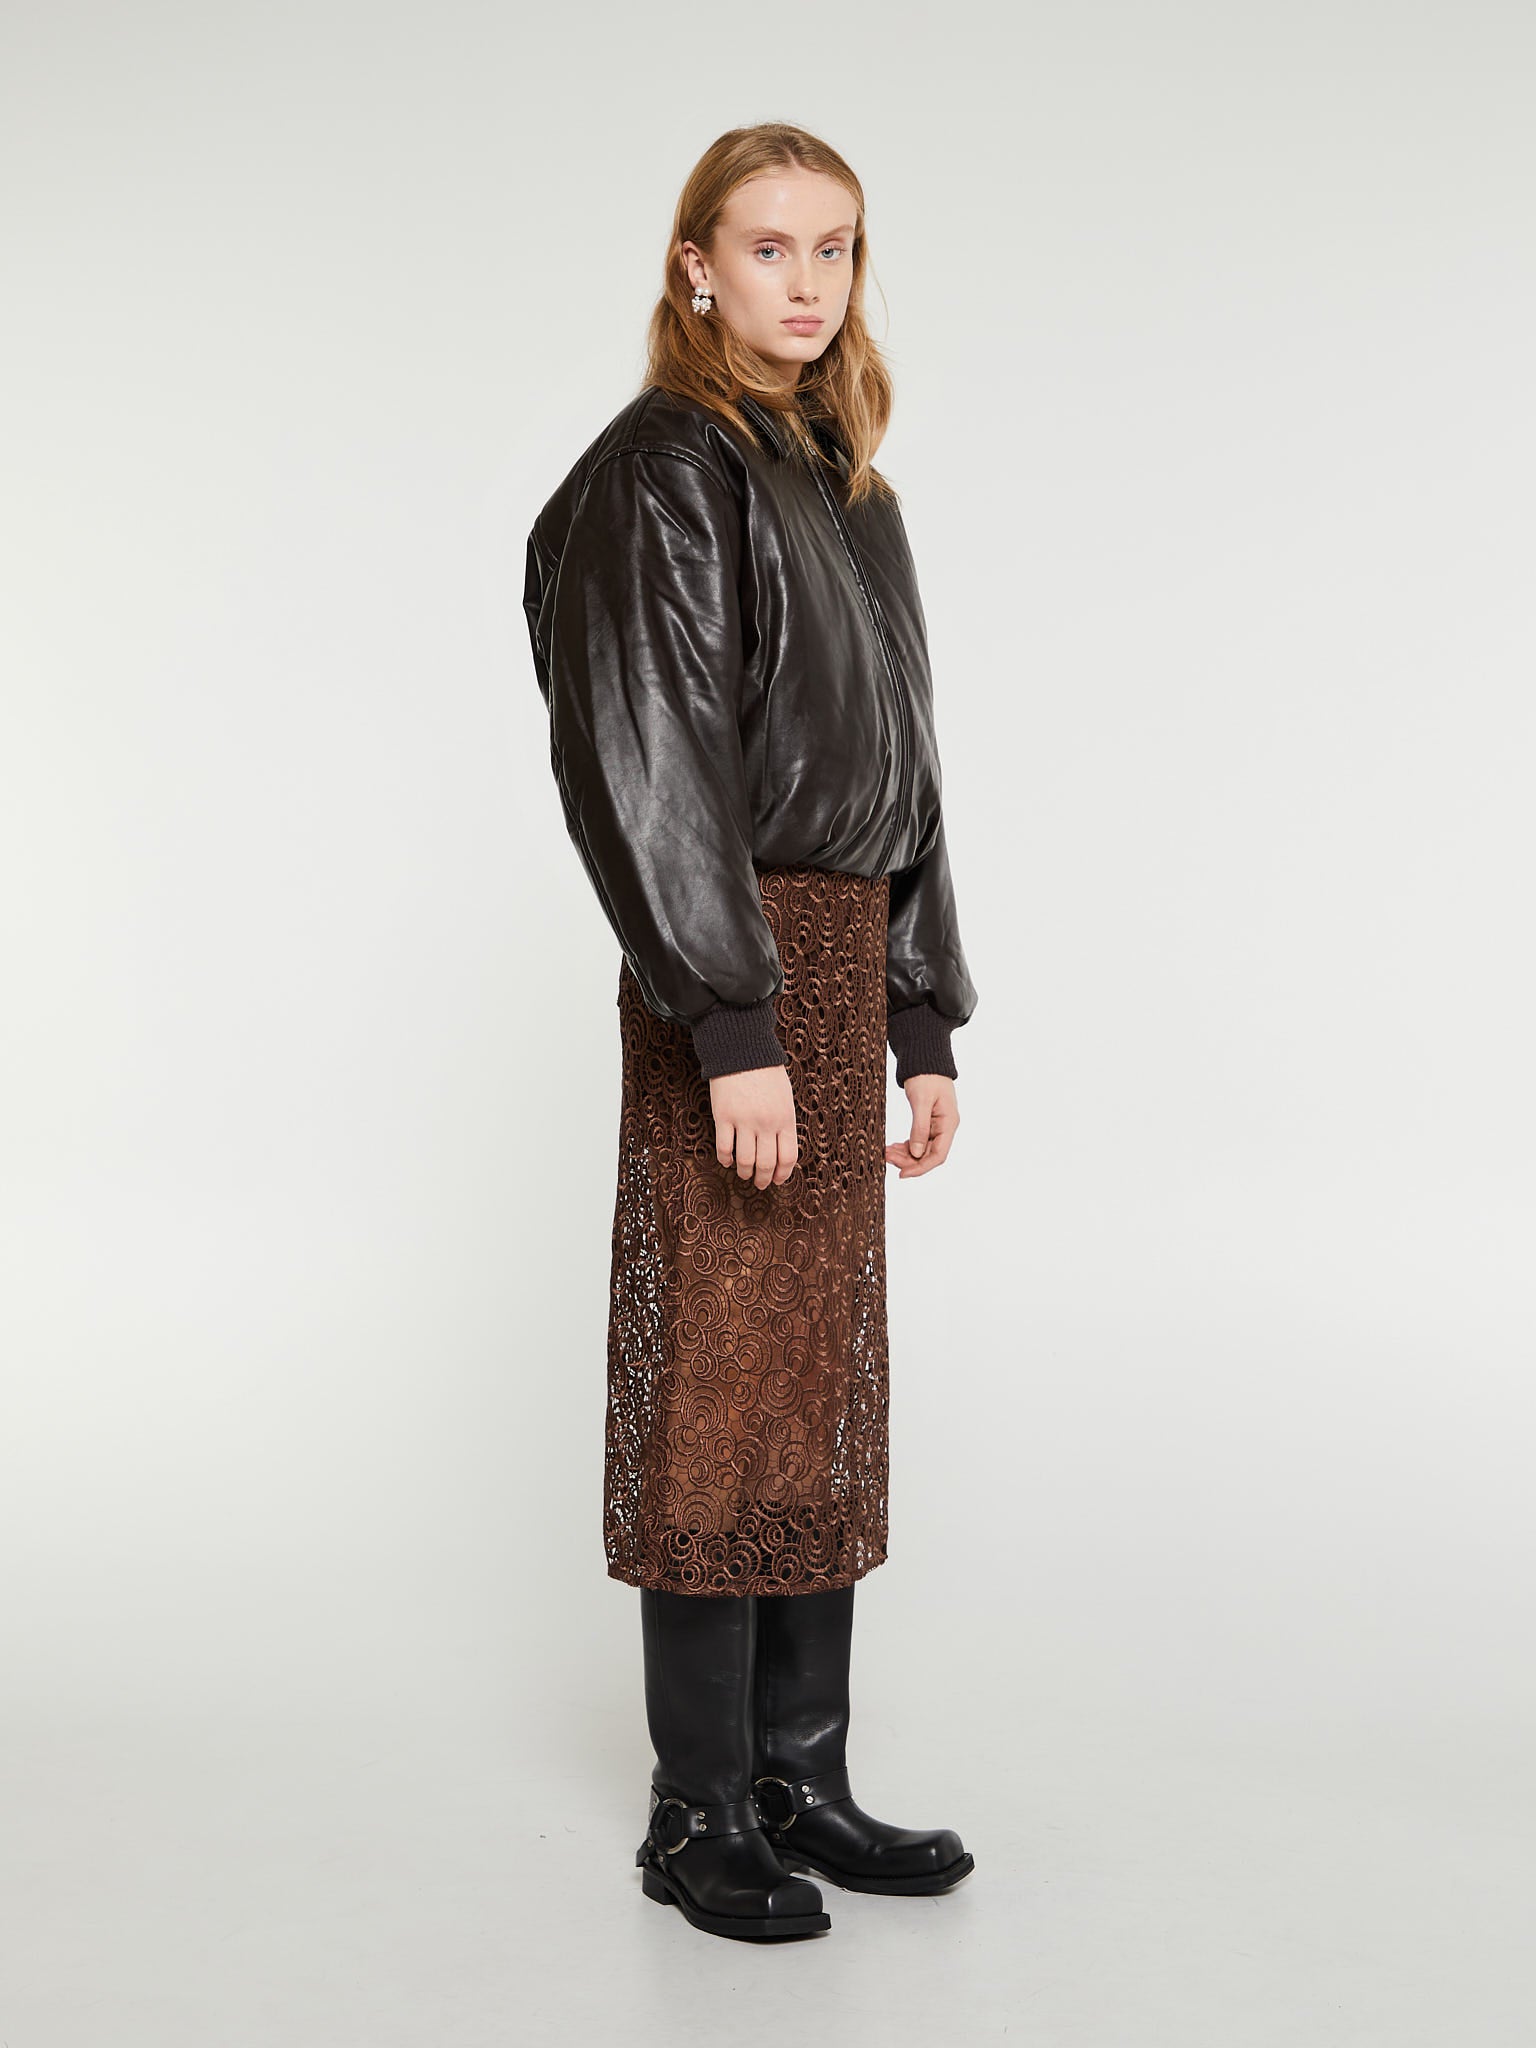 | Shop selection for women Coats & stoy at the Jackets